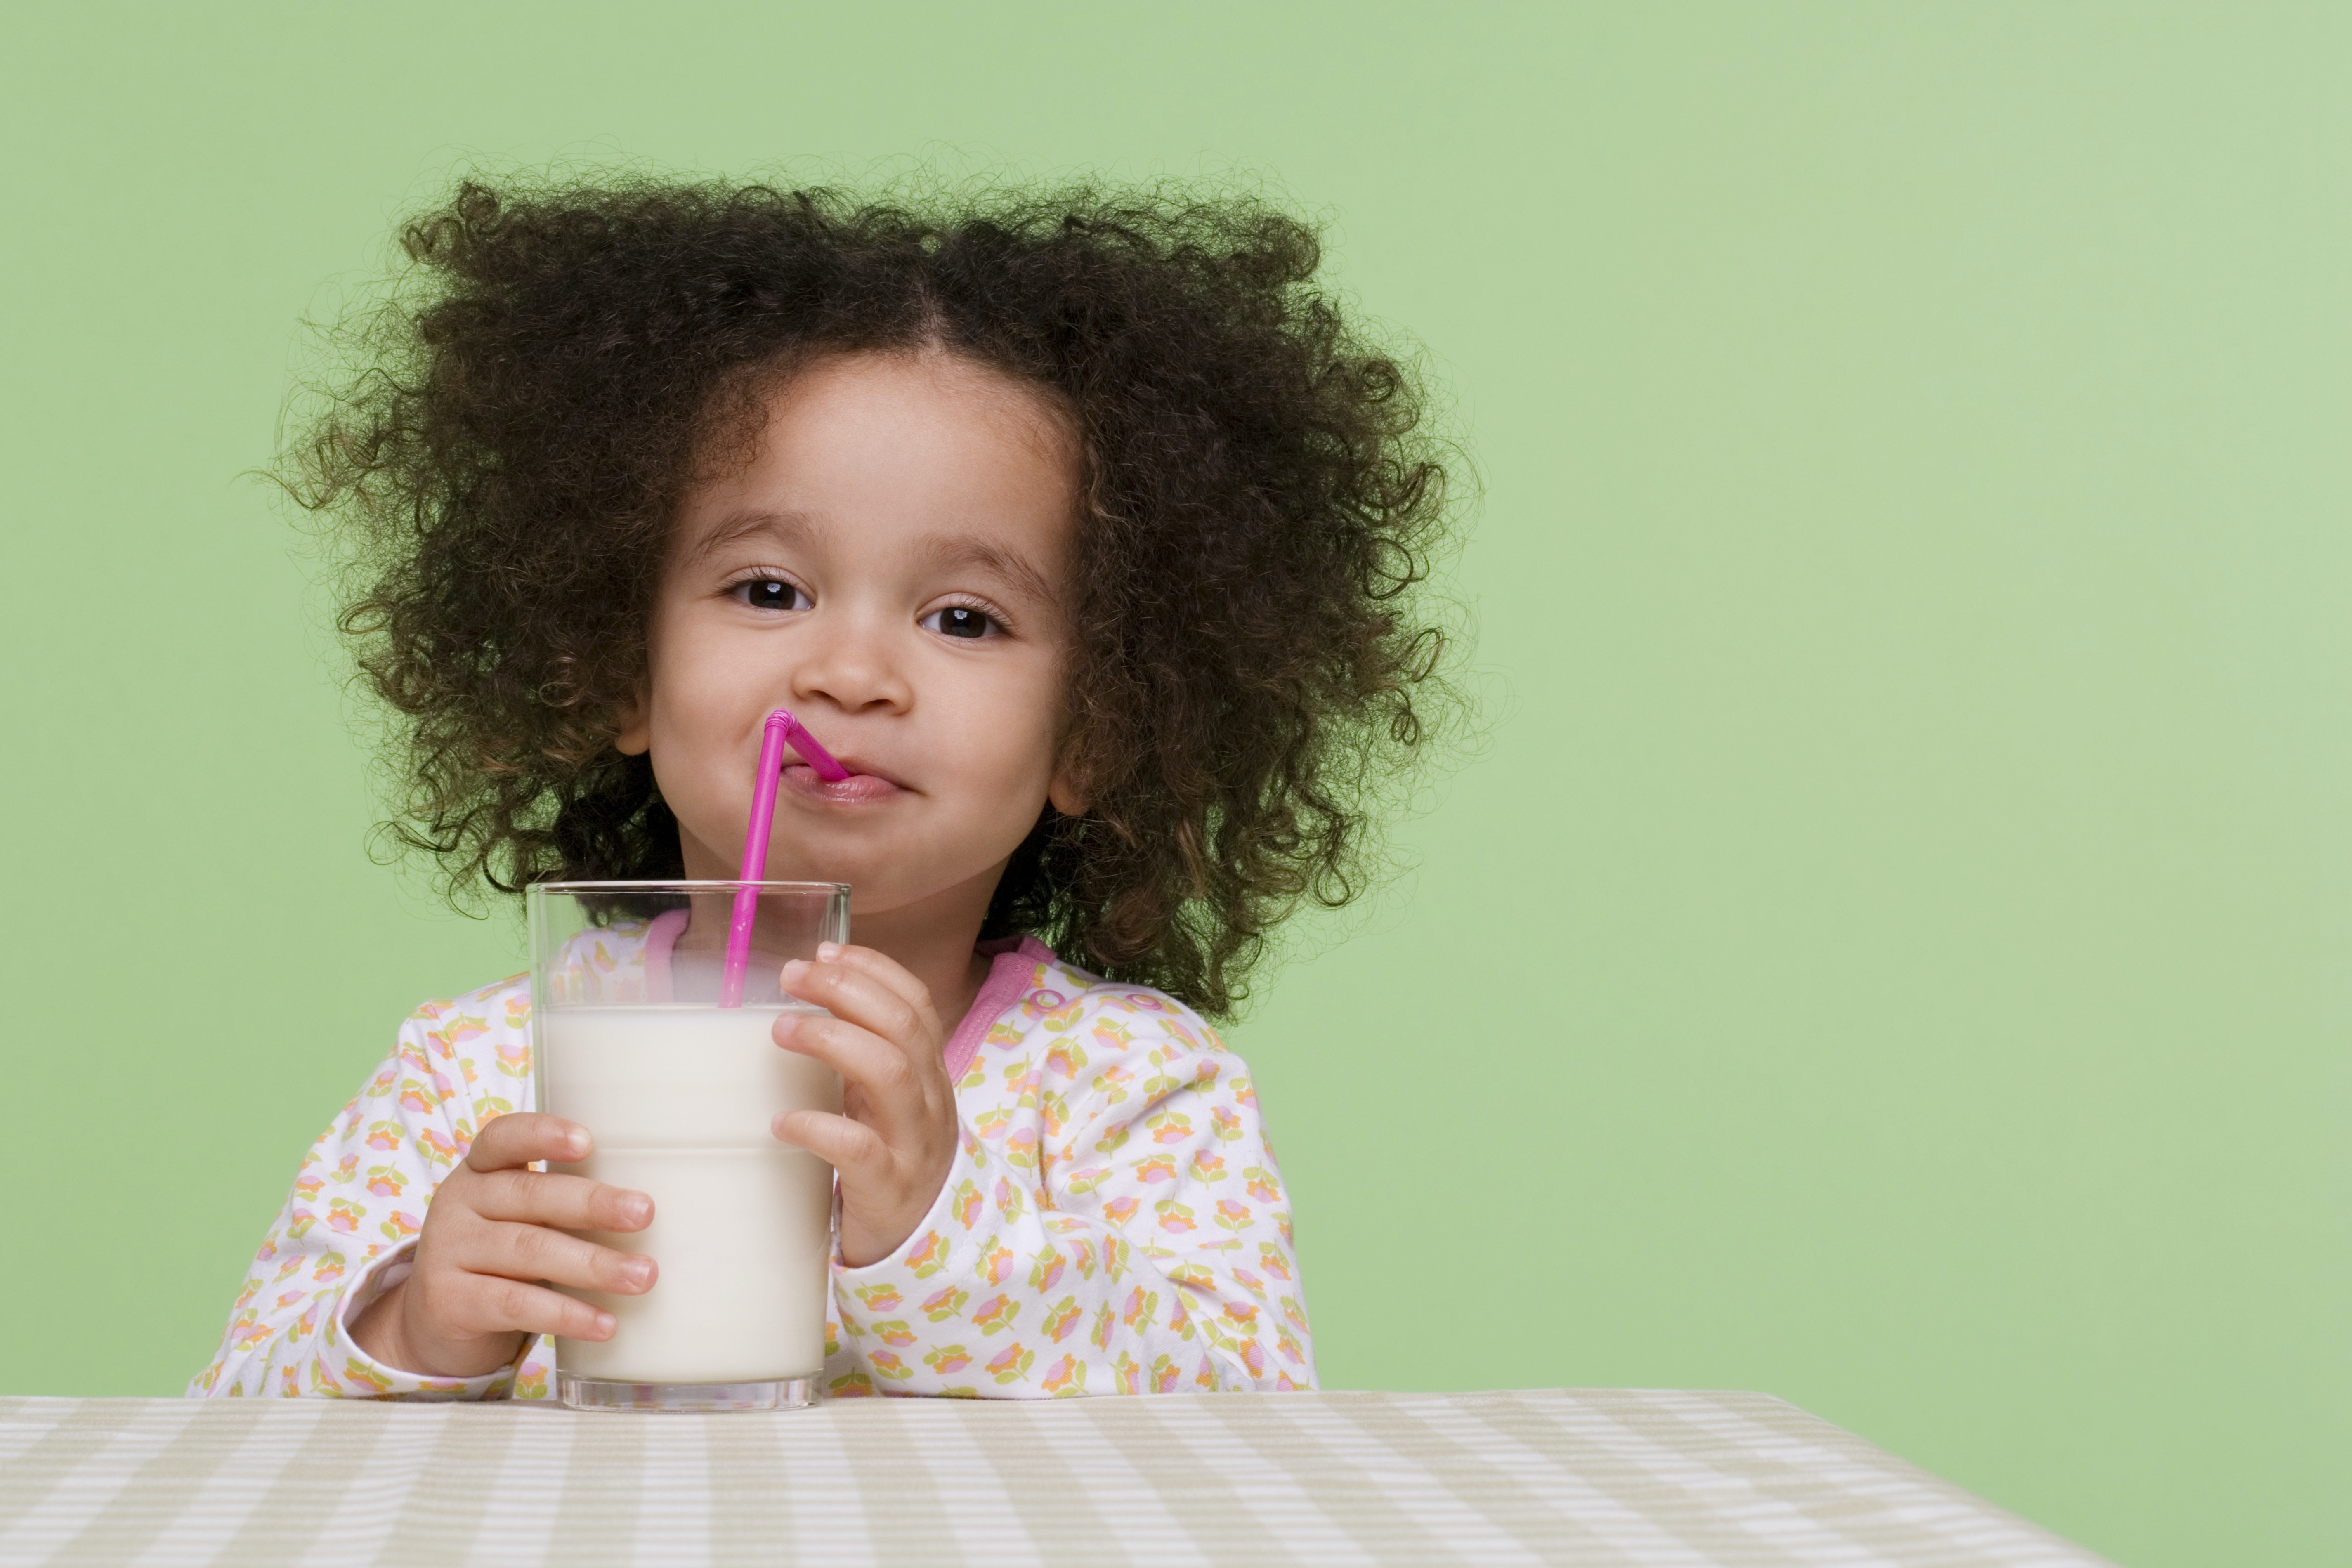 A smiling young girl drinking a glass of milk through a straw.